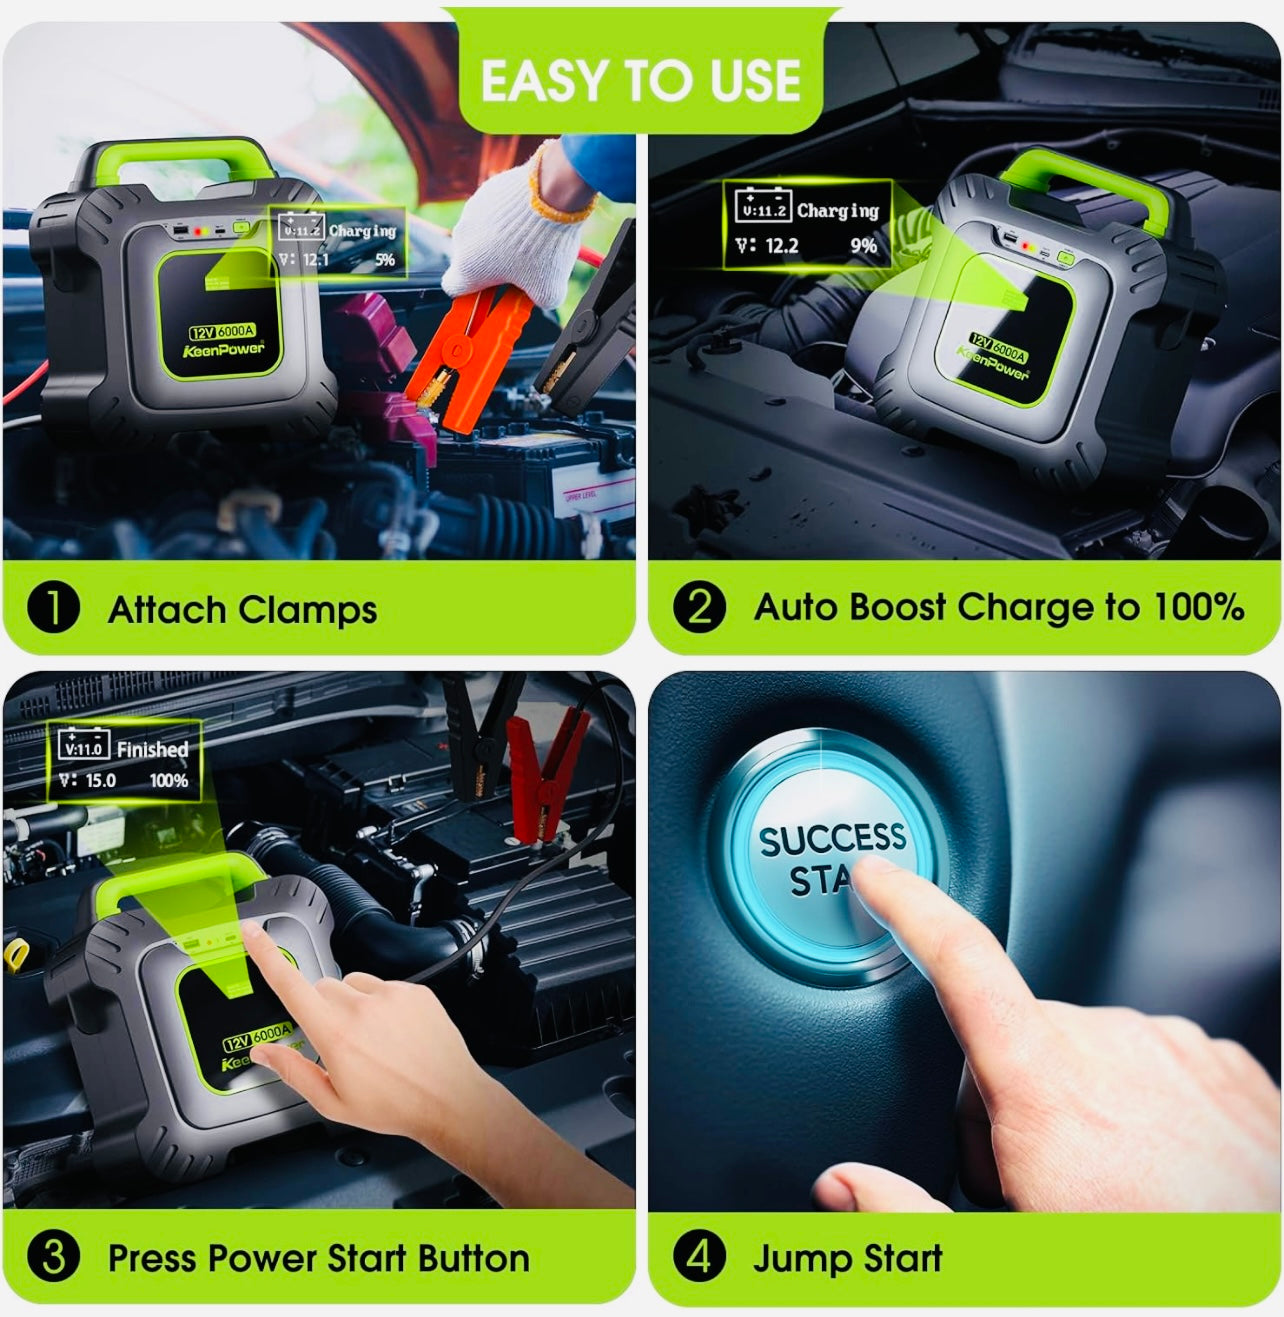 KeenPower 6000A Super Capacitor Battery-Less Portable Jump Starter for 12V Car, Built-in 6 * 3000F Supercapacitor, No Pre-Charging Need, Extremely Safe, Always Ready Jump Start All 12V Car